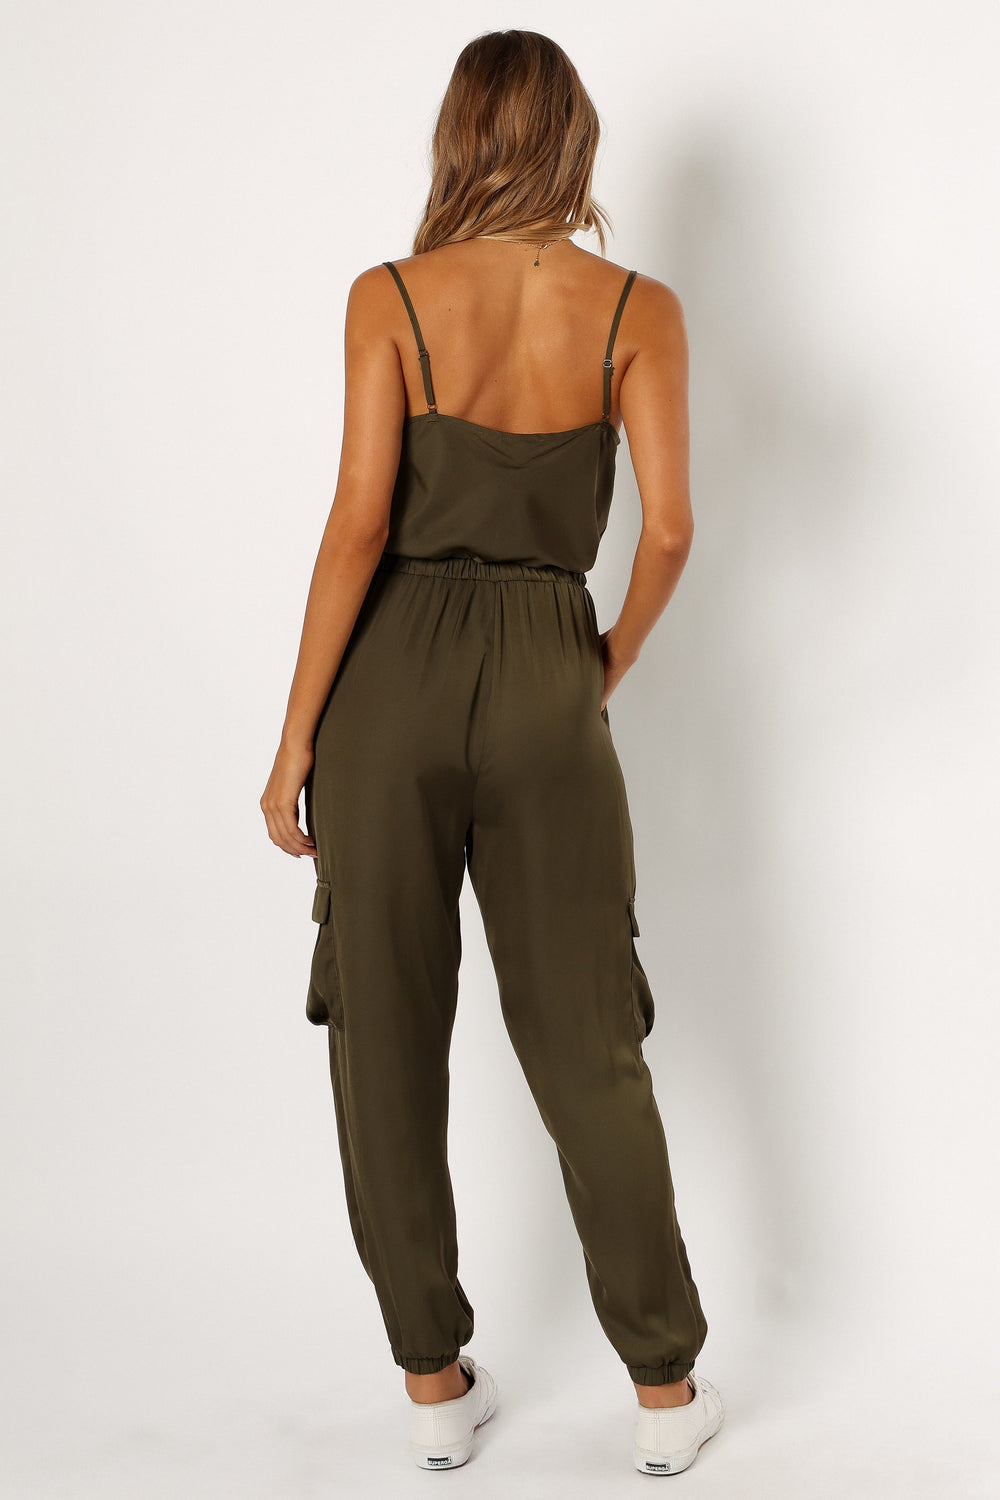 Petal and Pup USA Rompers Jasleen Jumpsuit - Olive